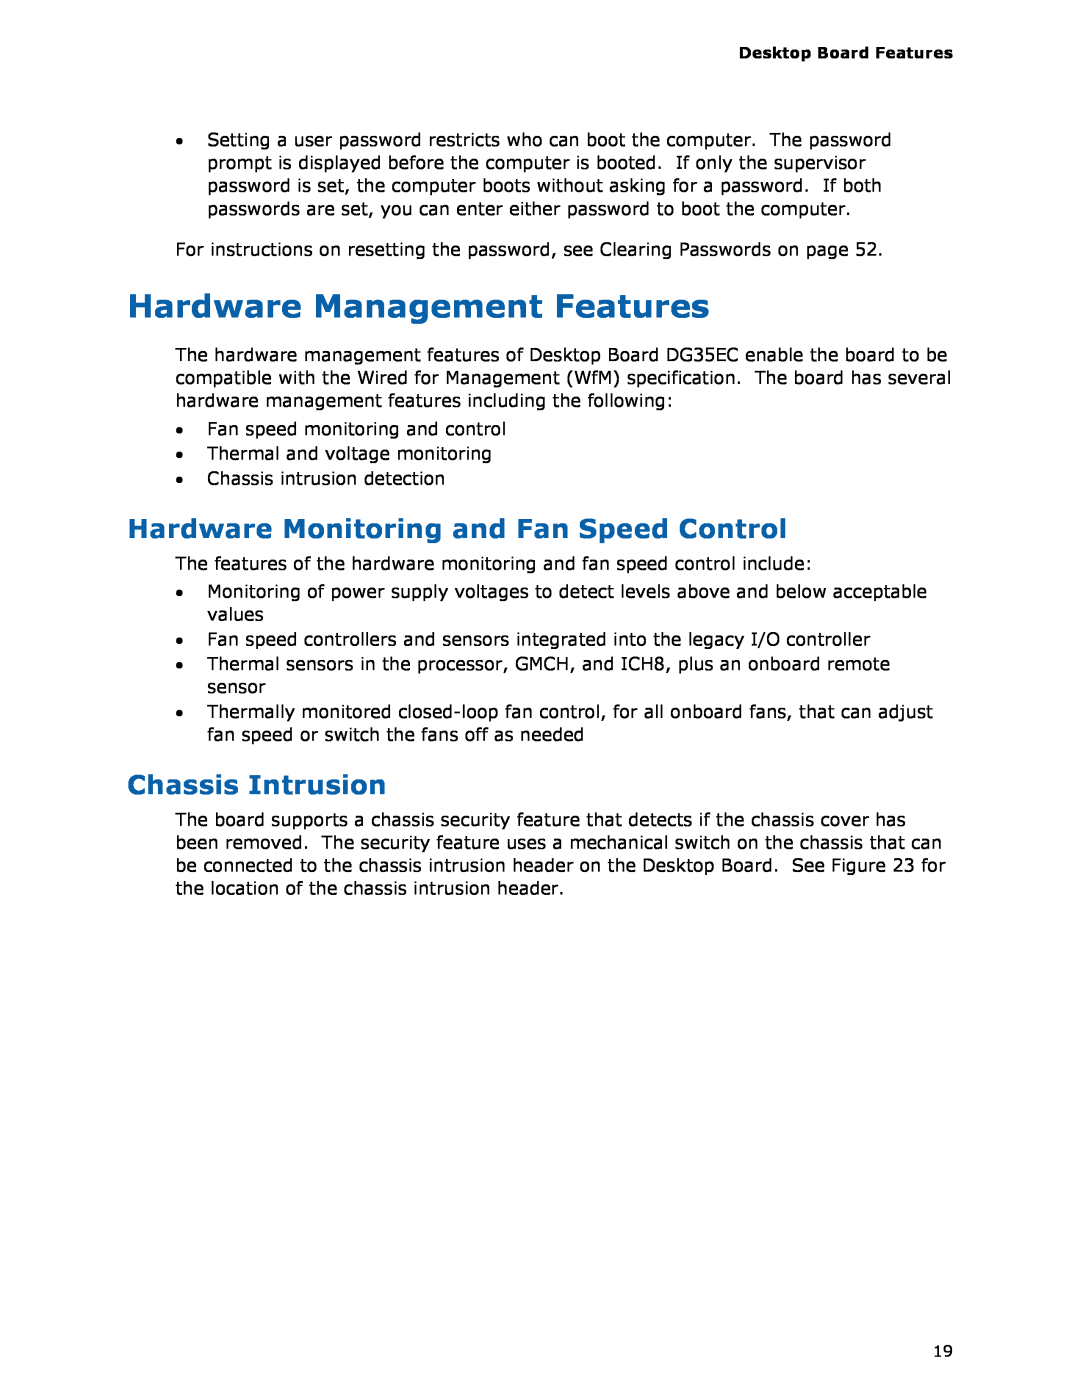 Intel DG35EC manual Hardware Management Features, Hardware Monitoring and Fan Speed Control, Chassis Intrusion 